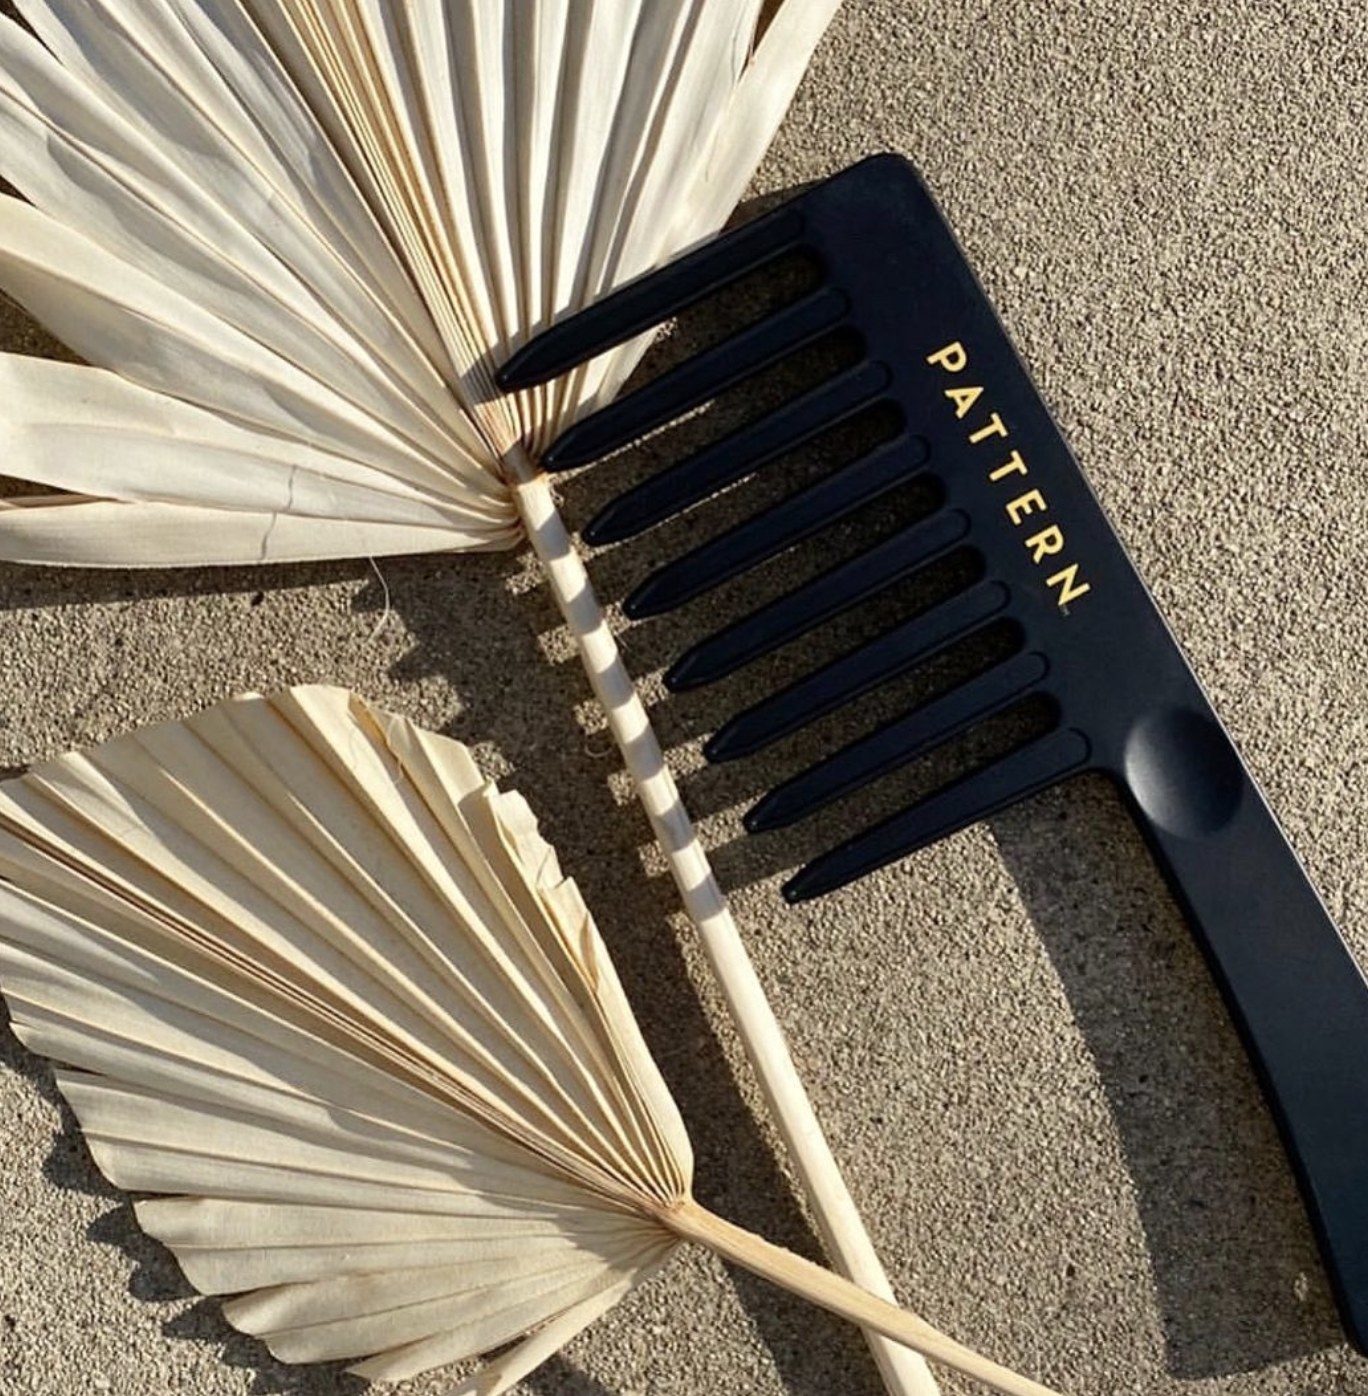 the brush against dried plants